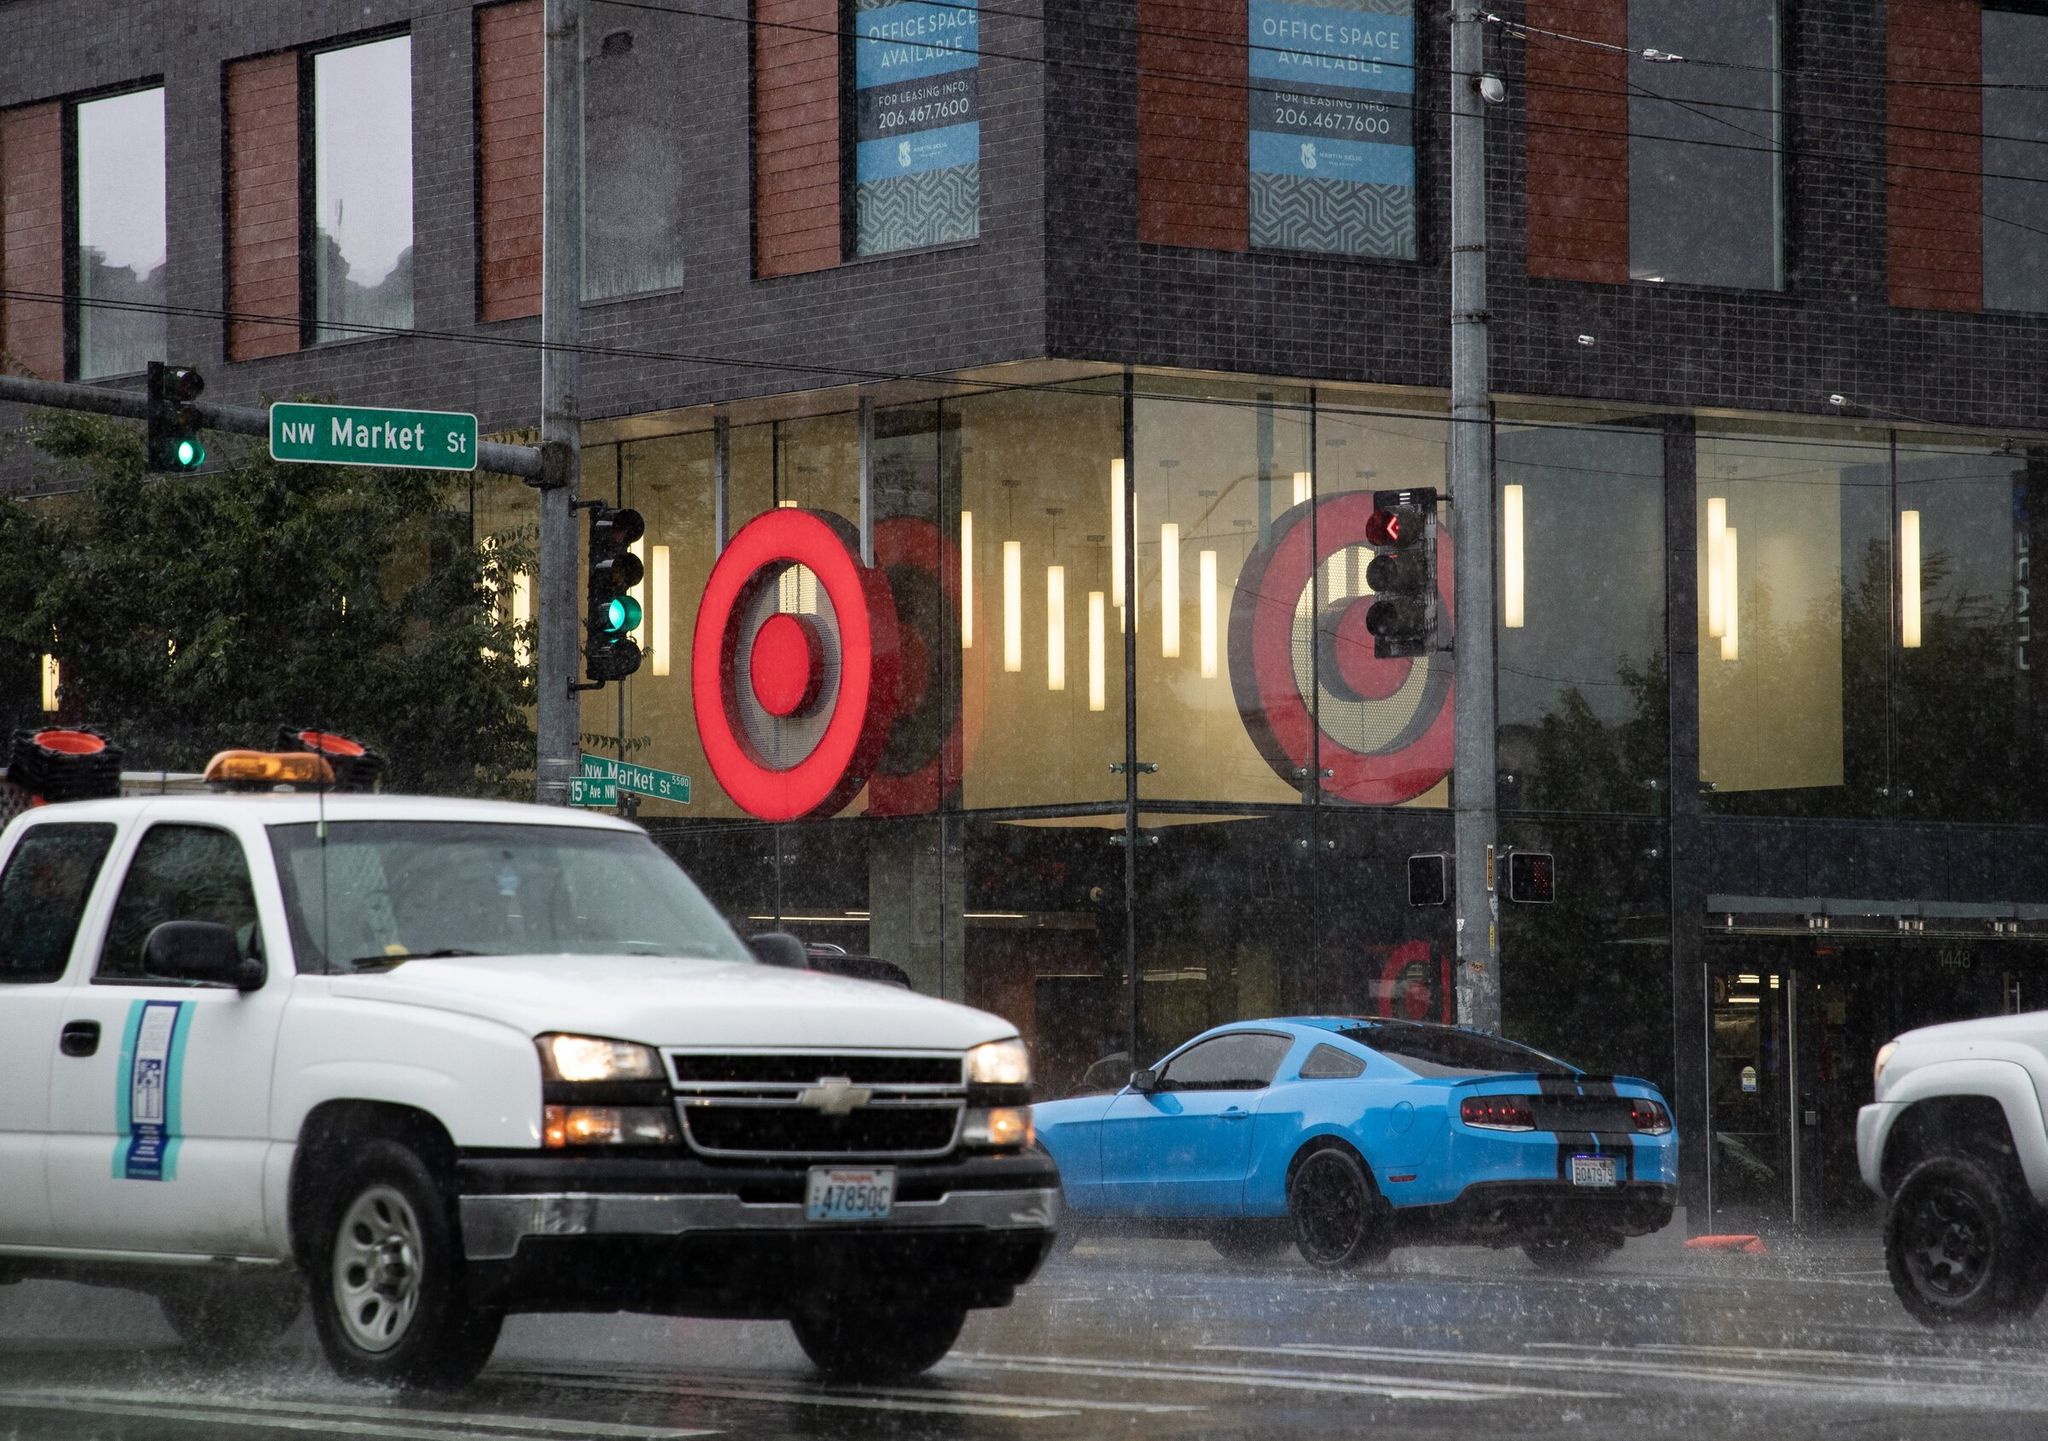 A photo of the Target store in Ballard with cars driving on the street in front of it